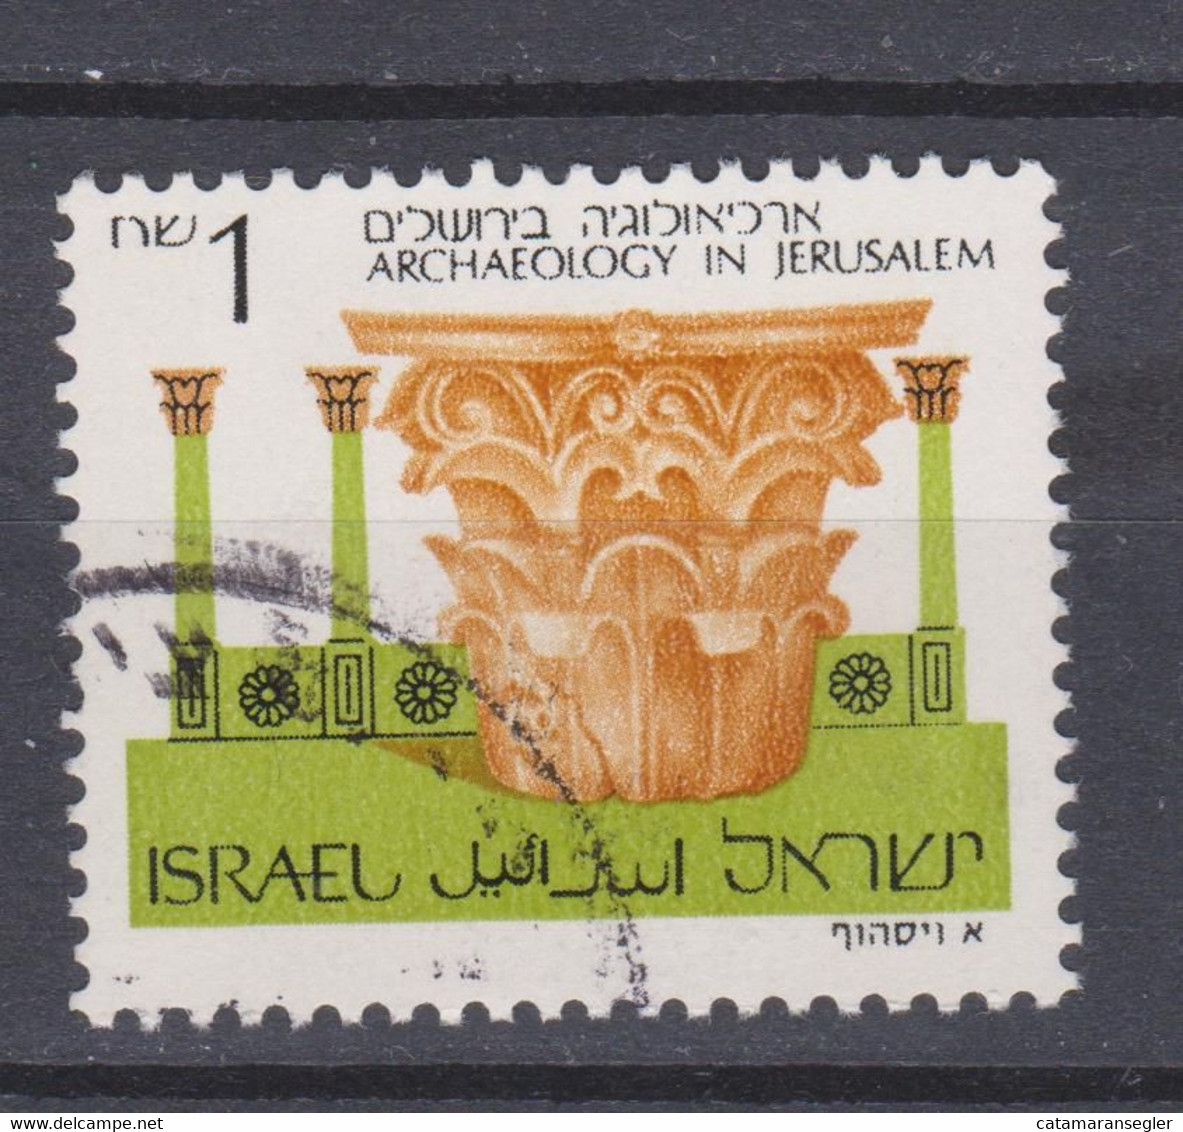 Israel 1988  Nr 1024 Archeology, Bale 921-II, Printing Varieties  2 Ph Fine Canceled - RARE - - Used Stamps (with Tabs)